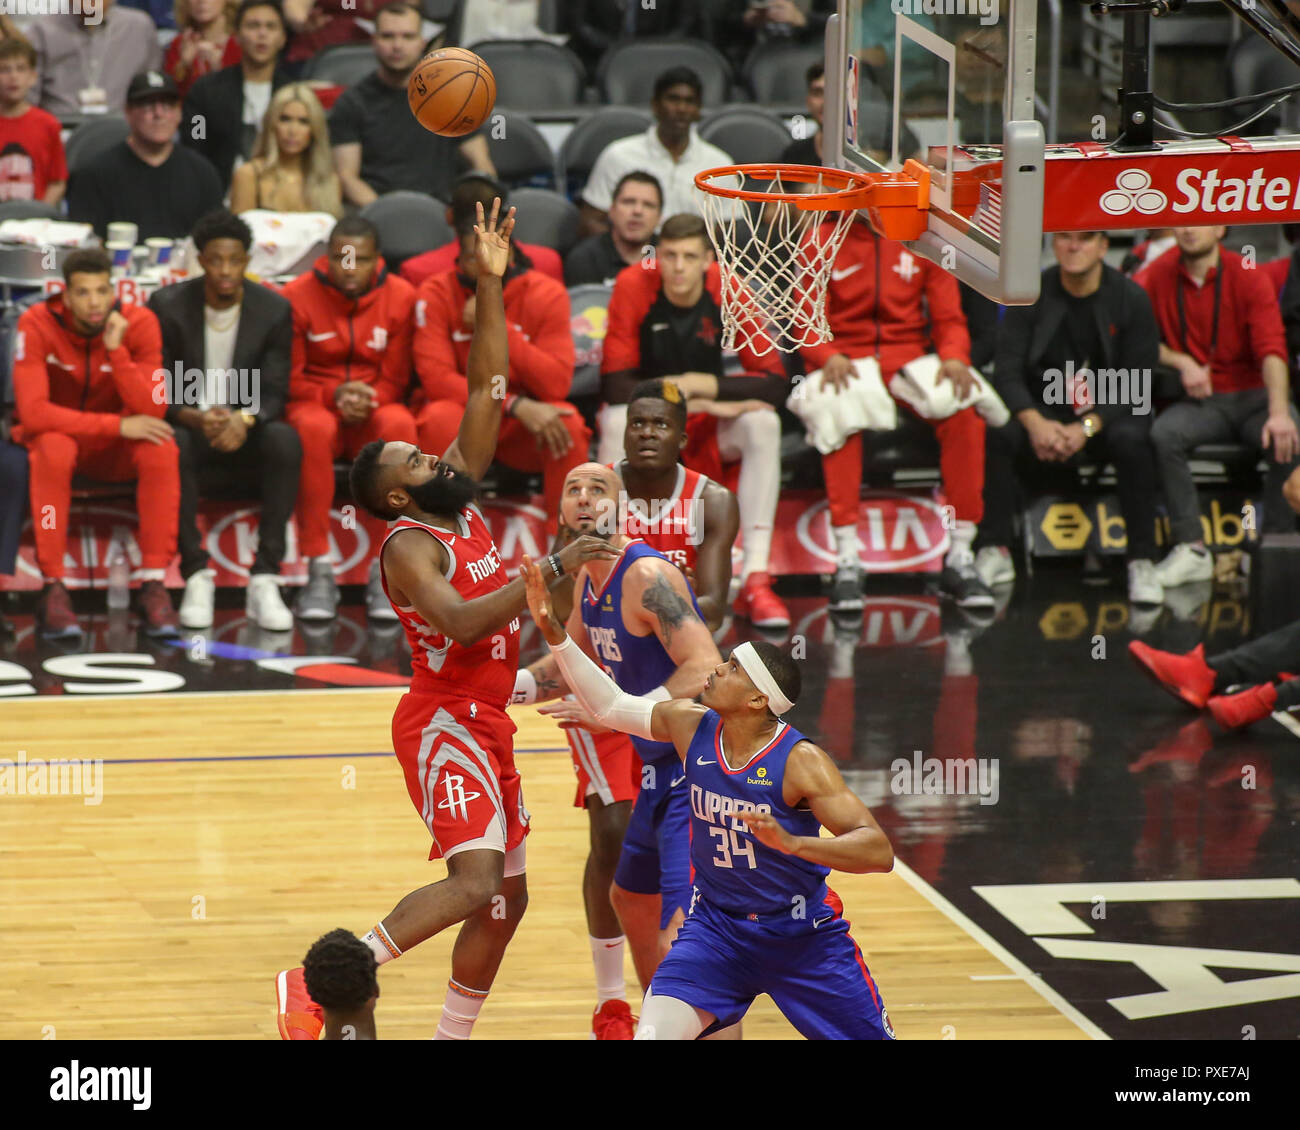 Los Angeles, CA, USA. 21st Oct, 2018. Houston Rockets guard James Harden #13 on a floater during the Houston Rockets vs Los Angeles Clippers at Staples Center on October 21, 2018. (Photo by Jevone Moore) Credit: csm/Alamy Live News Stock Photo